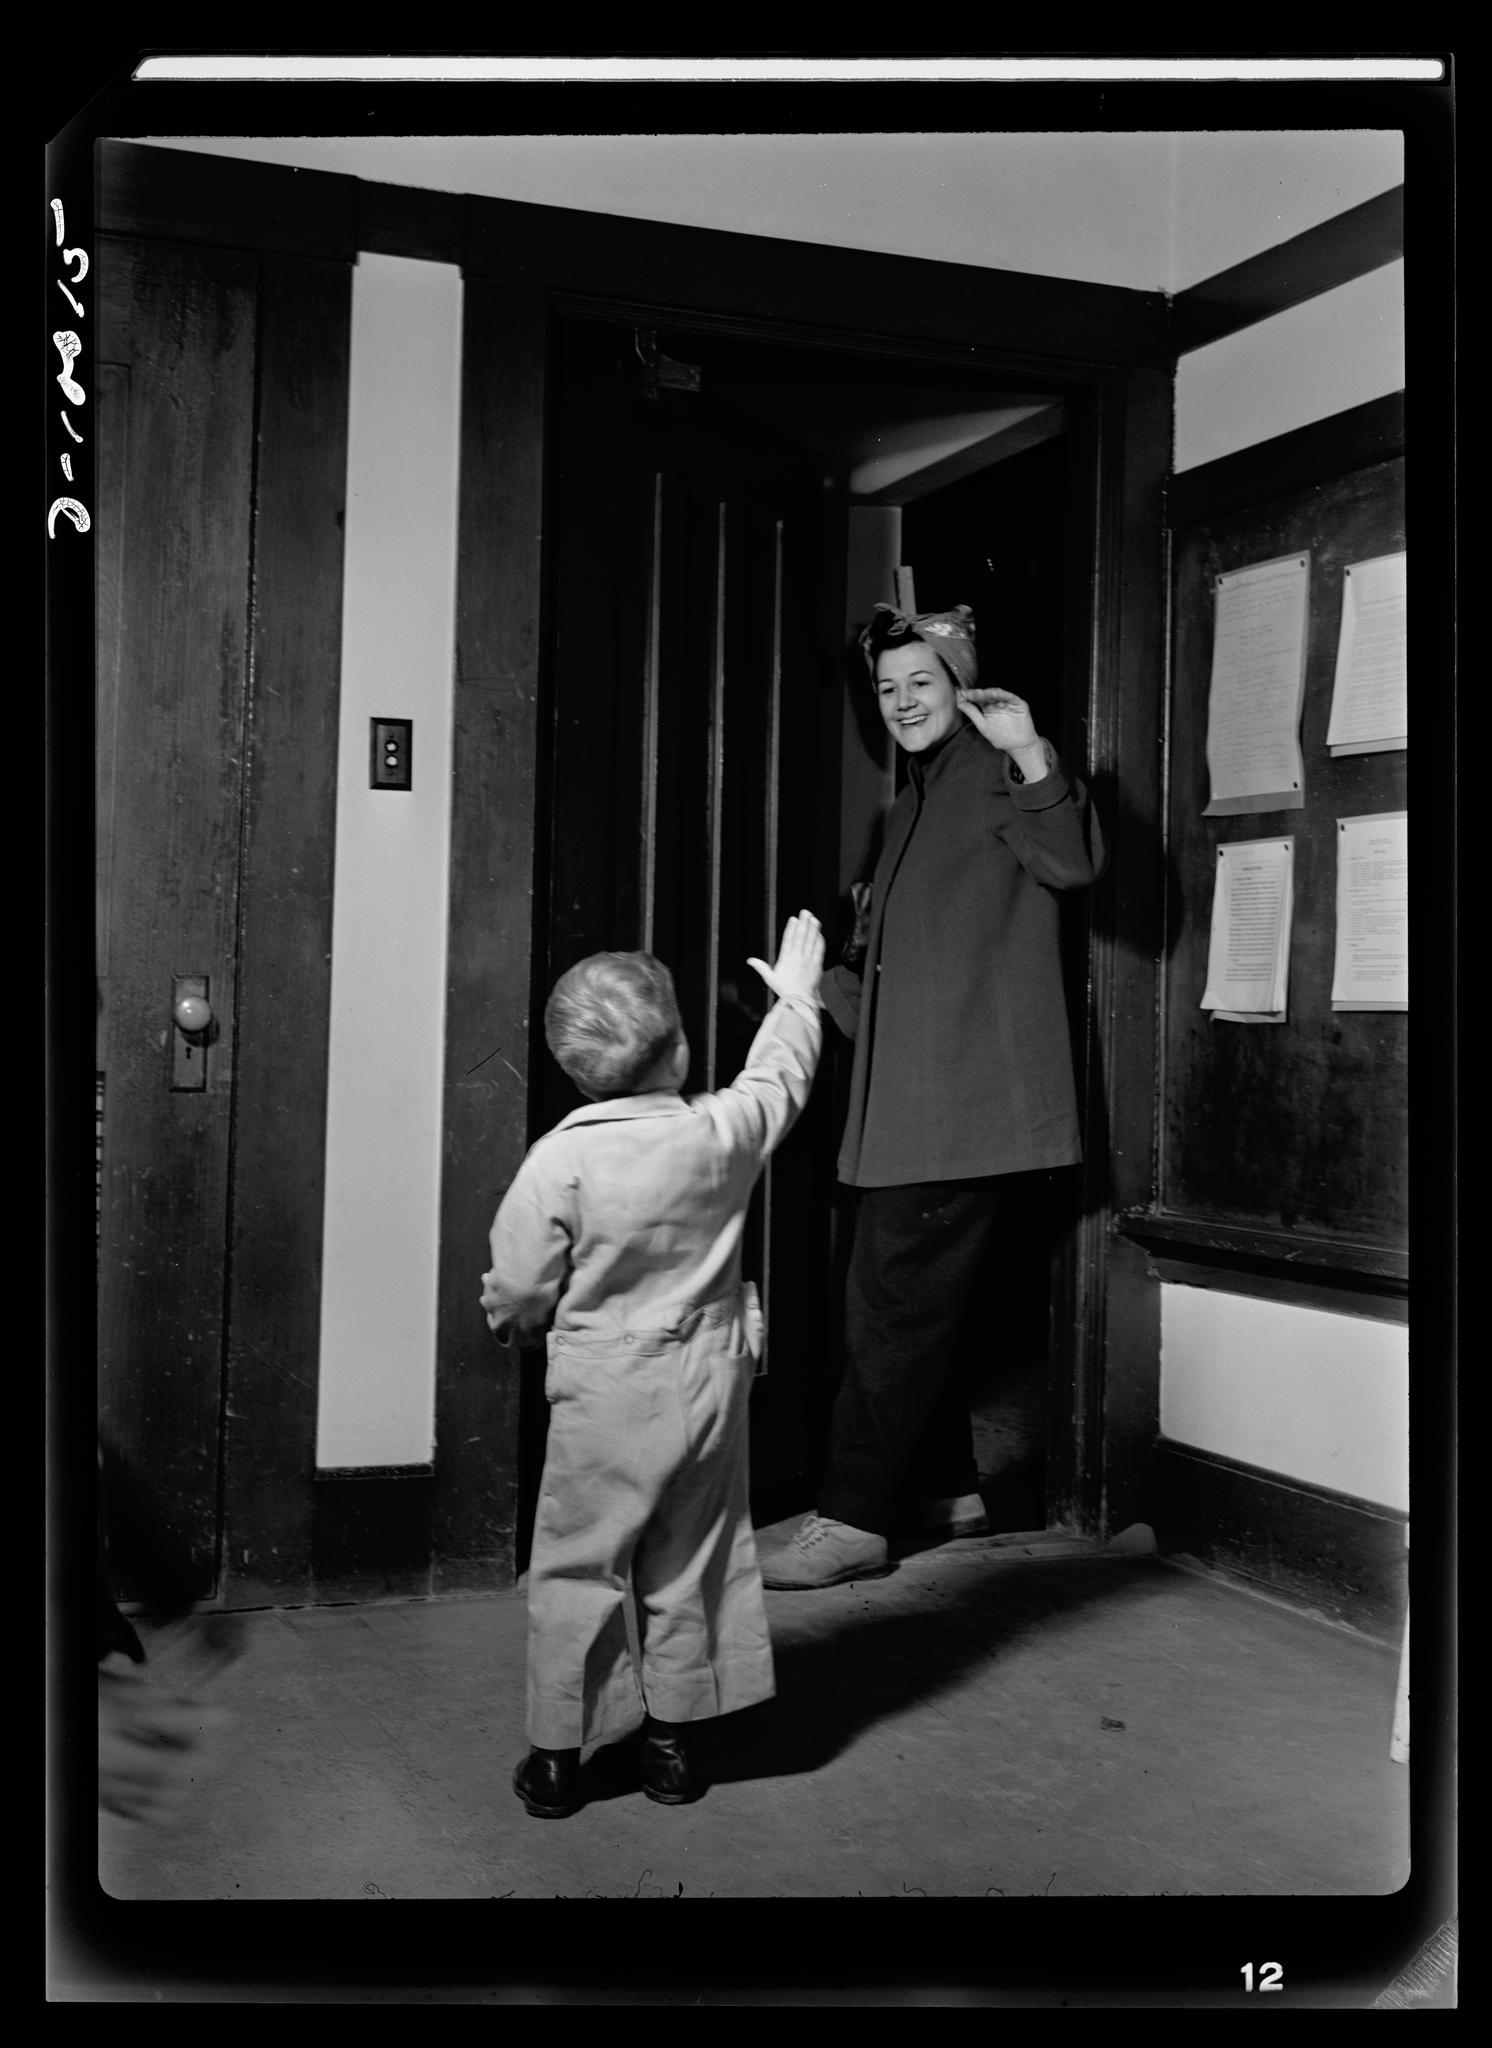 The black and white photograph shows a woman and young child, likely mother and son, standing in a doorway. The woman is smiling and has her hand raised, perhaps waving to or greeting someone outside the frame. The child is reaching up towards the woman. Based on their clothing and the setting, the image appears to be from an earlier time period, possibly the mid-20th century. A room with windows can be seen in the background through the open doorway.